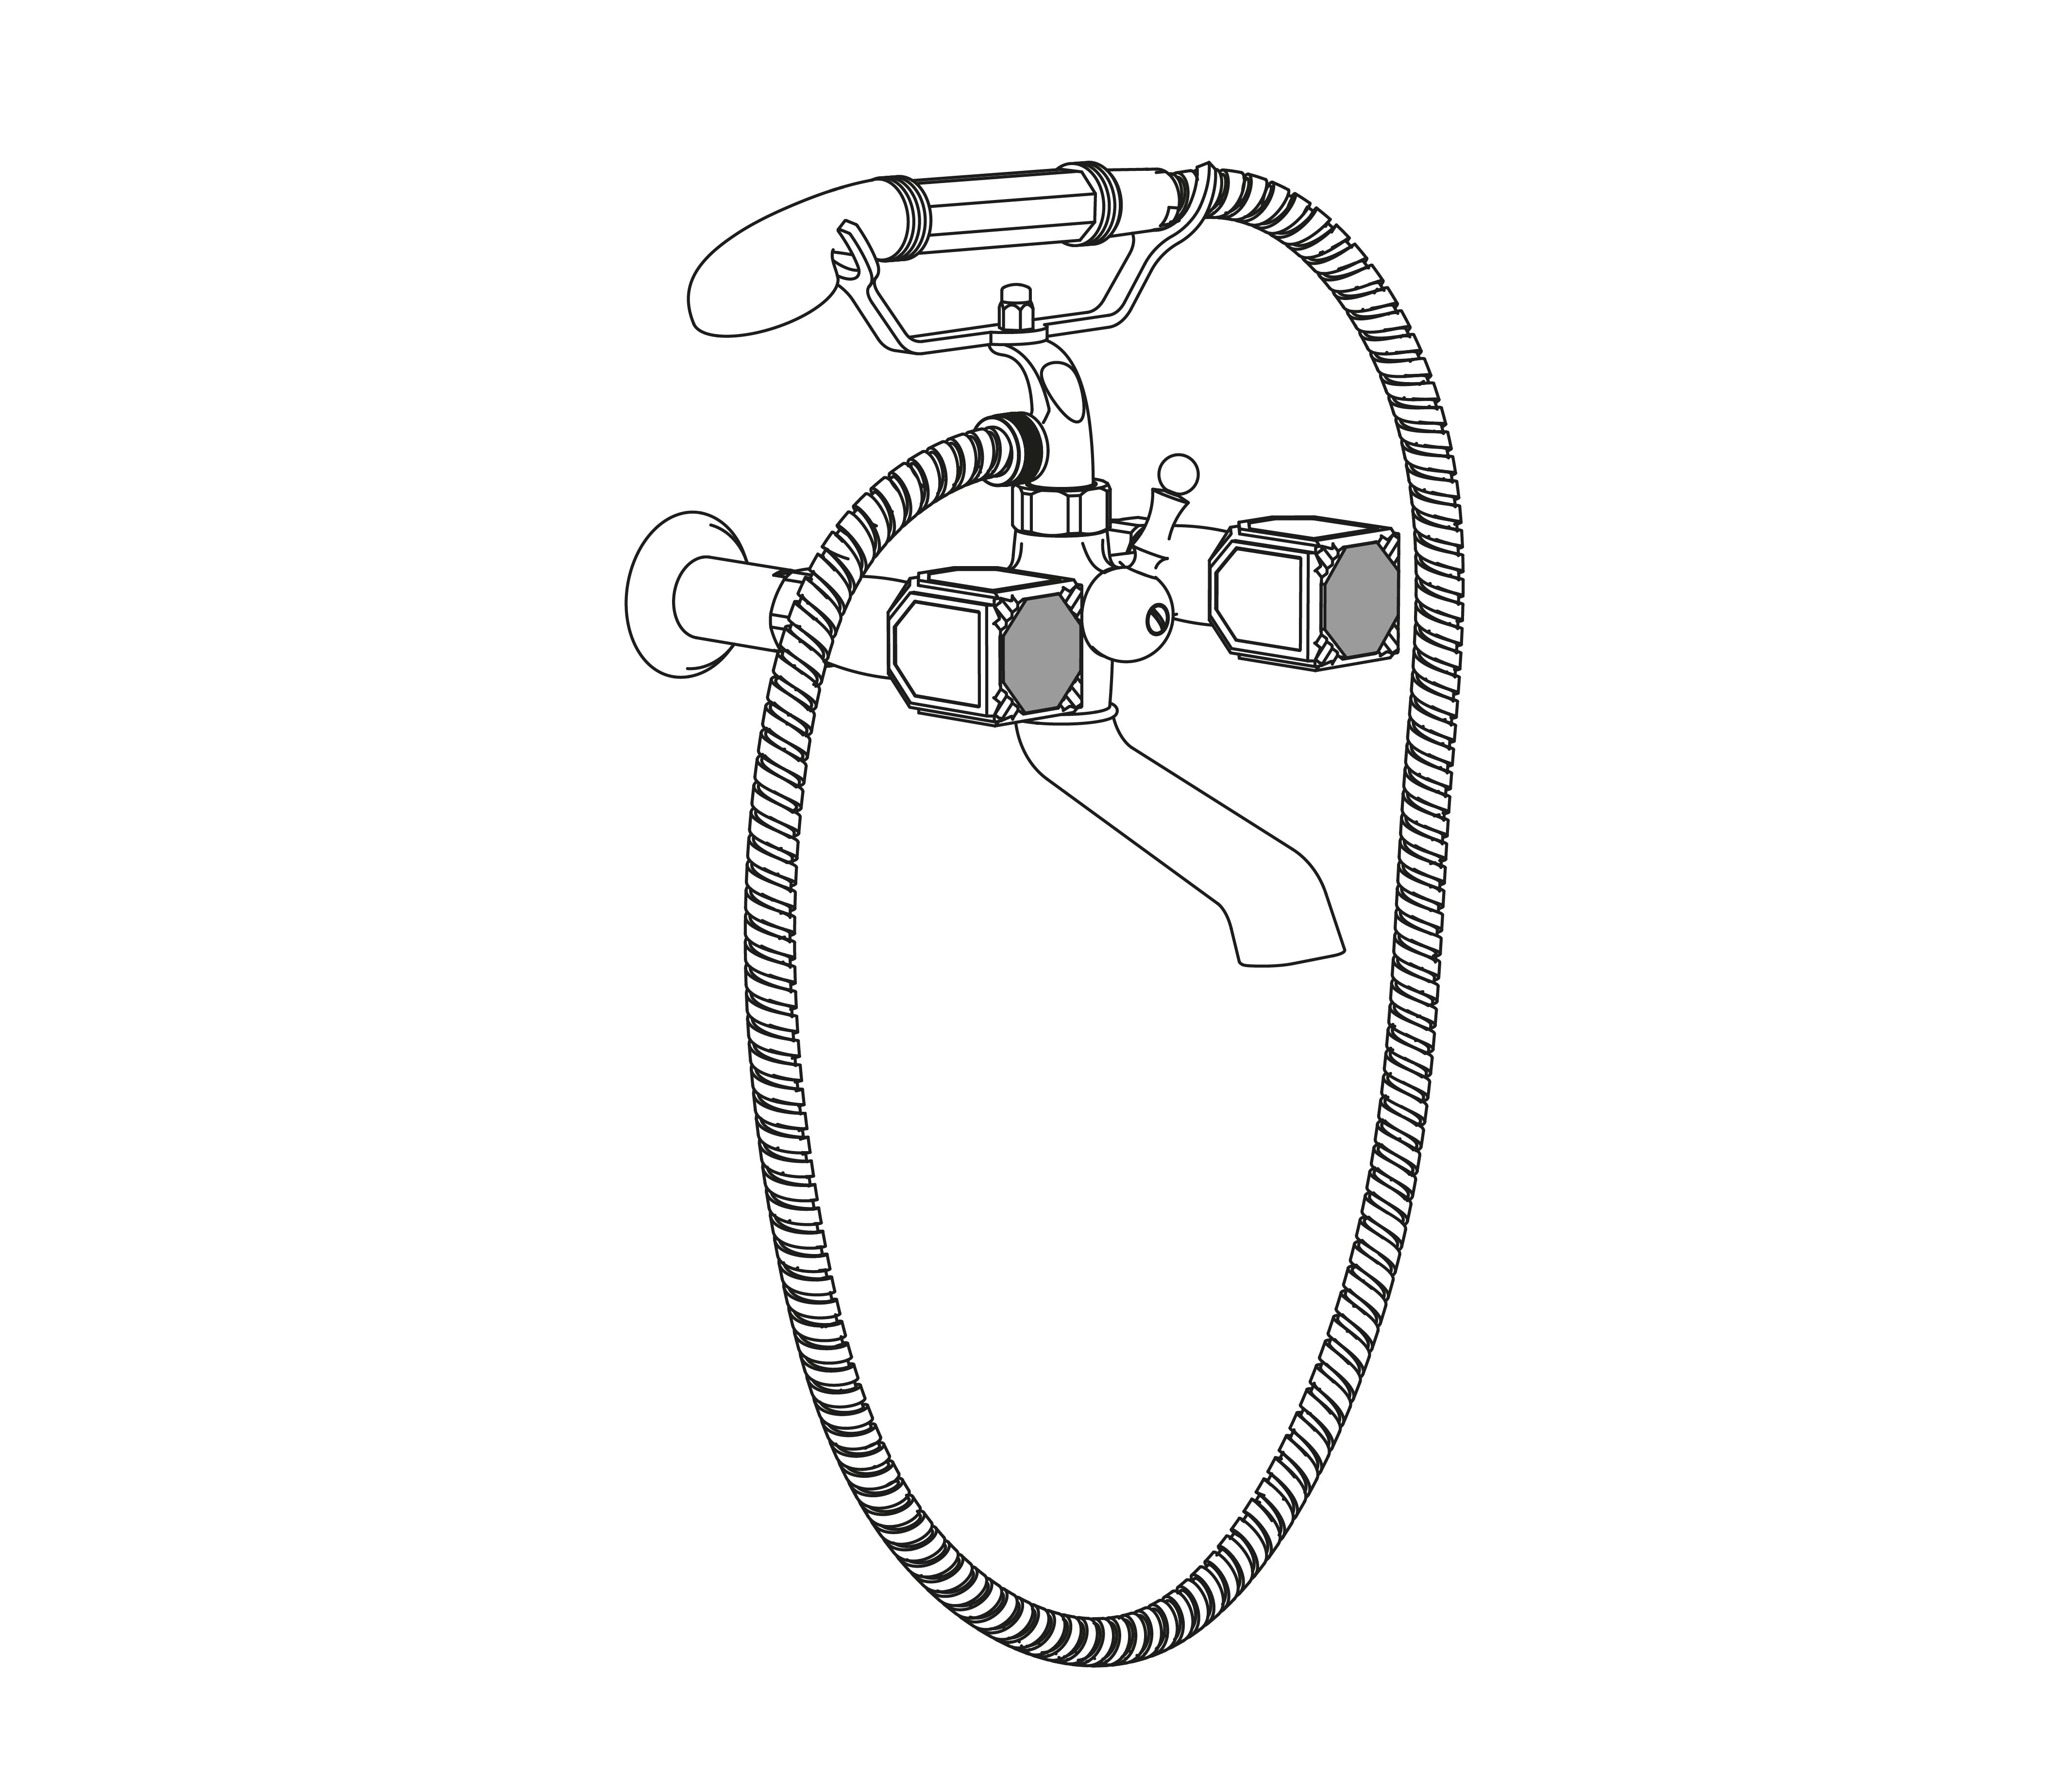 S60-3201 Wall mounted bath and shower mixer